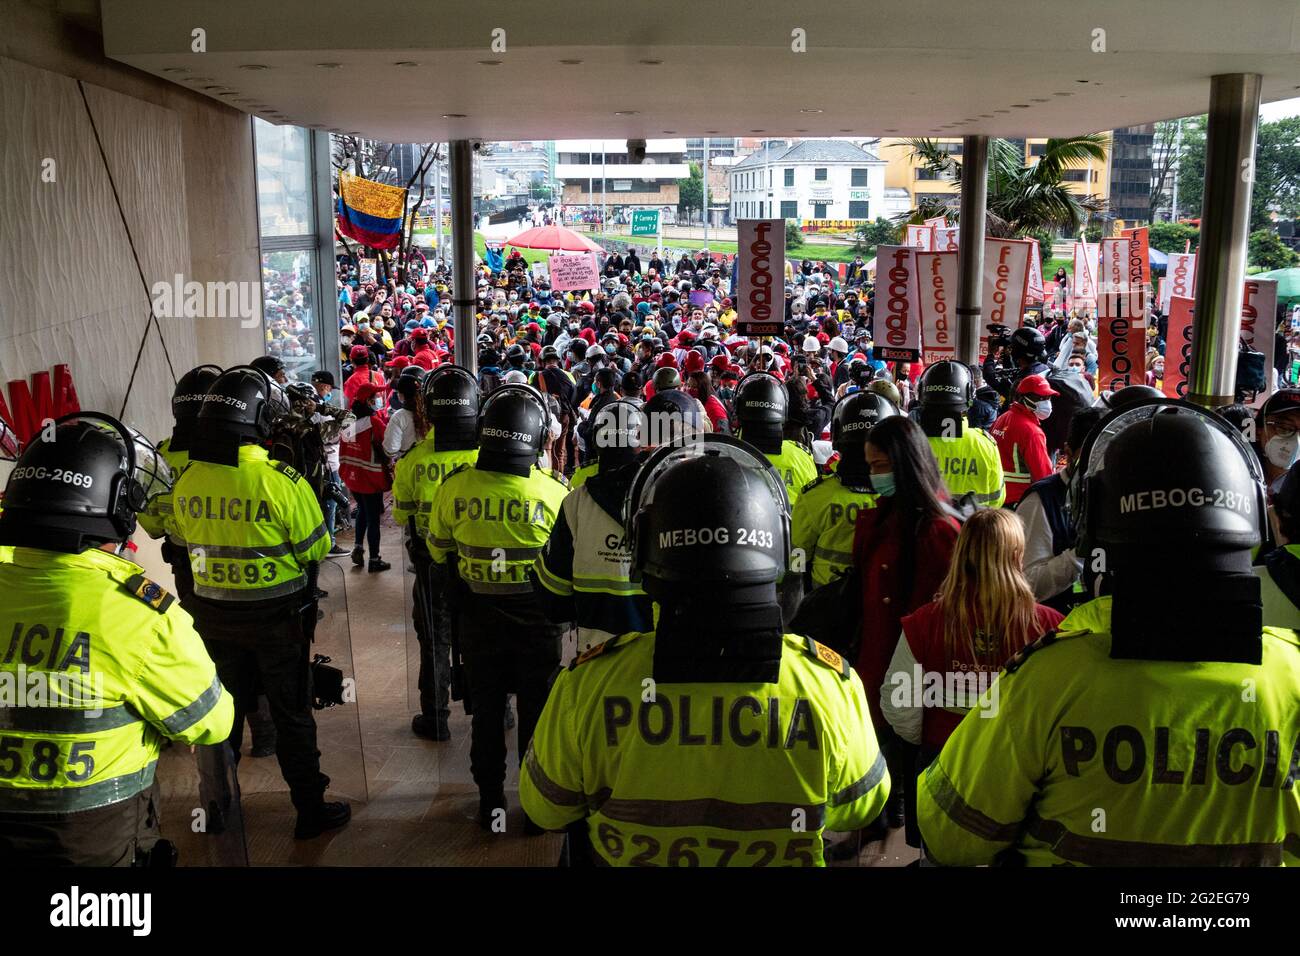 Several citizens staged a sit-in outside the Hotel Tequendama, while the meeting between the Strike Committee and the Inter-American Commission on Human Rights (IACHR) was taking place, this sit-in was mostly peaceful in Bogota, Colombia on June 9, 2021. Stock Photo